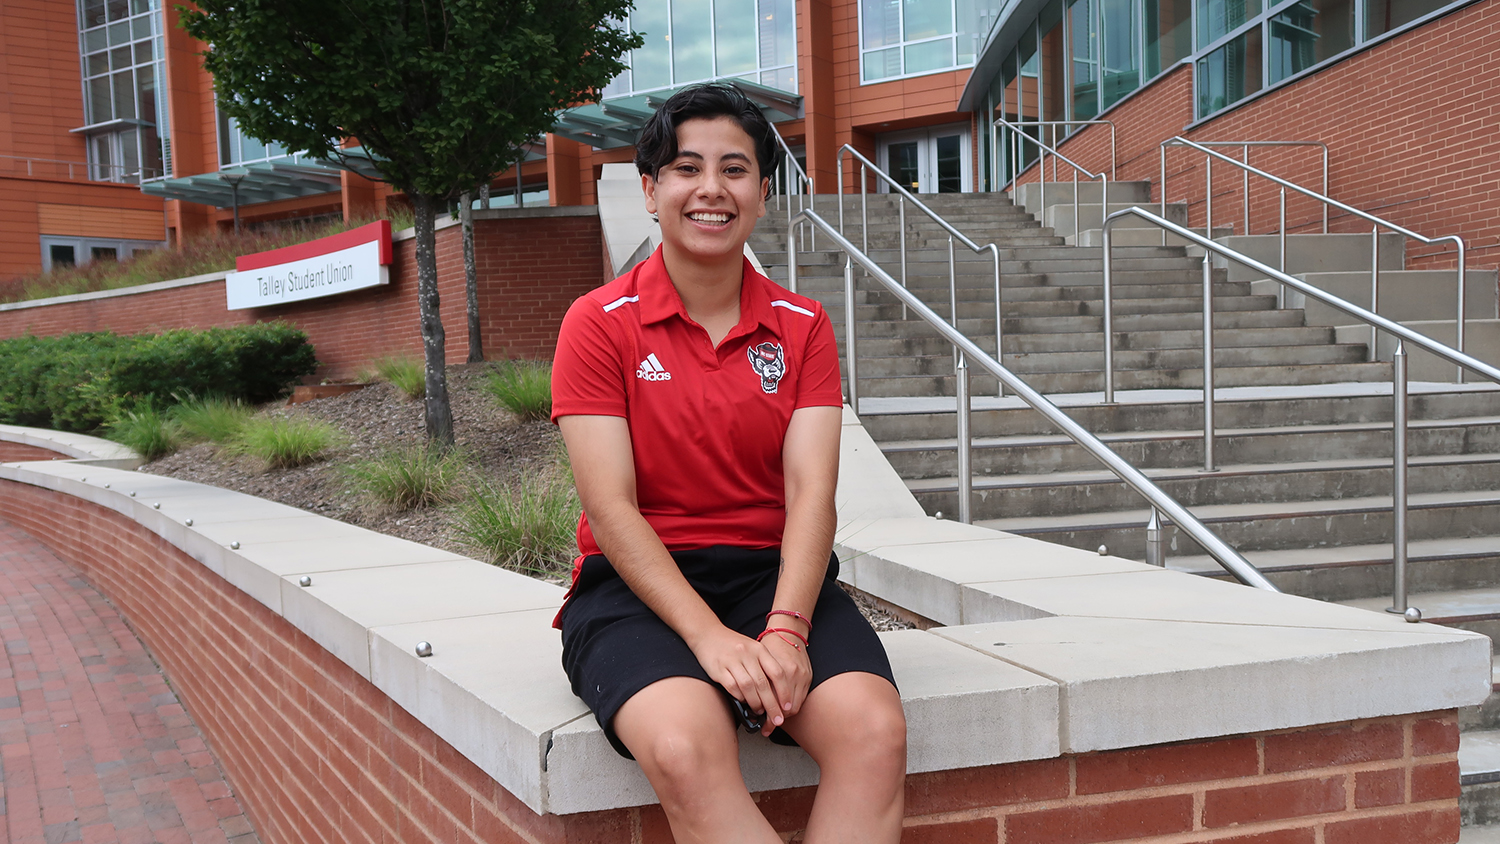 Daisy Aguilar Aguilar poses for a picture sitting next to the stairs at Talley Student Union.